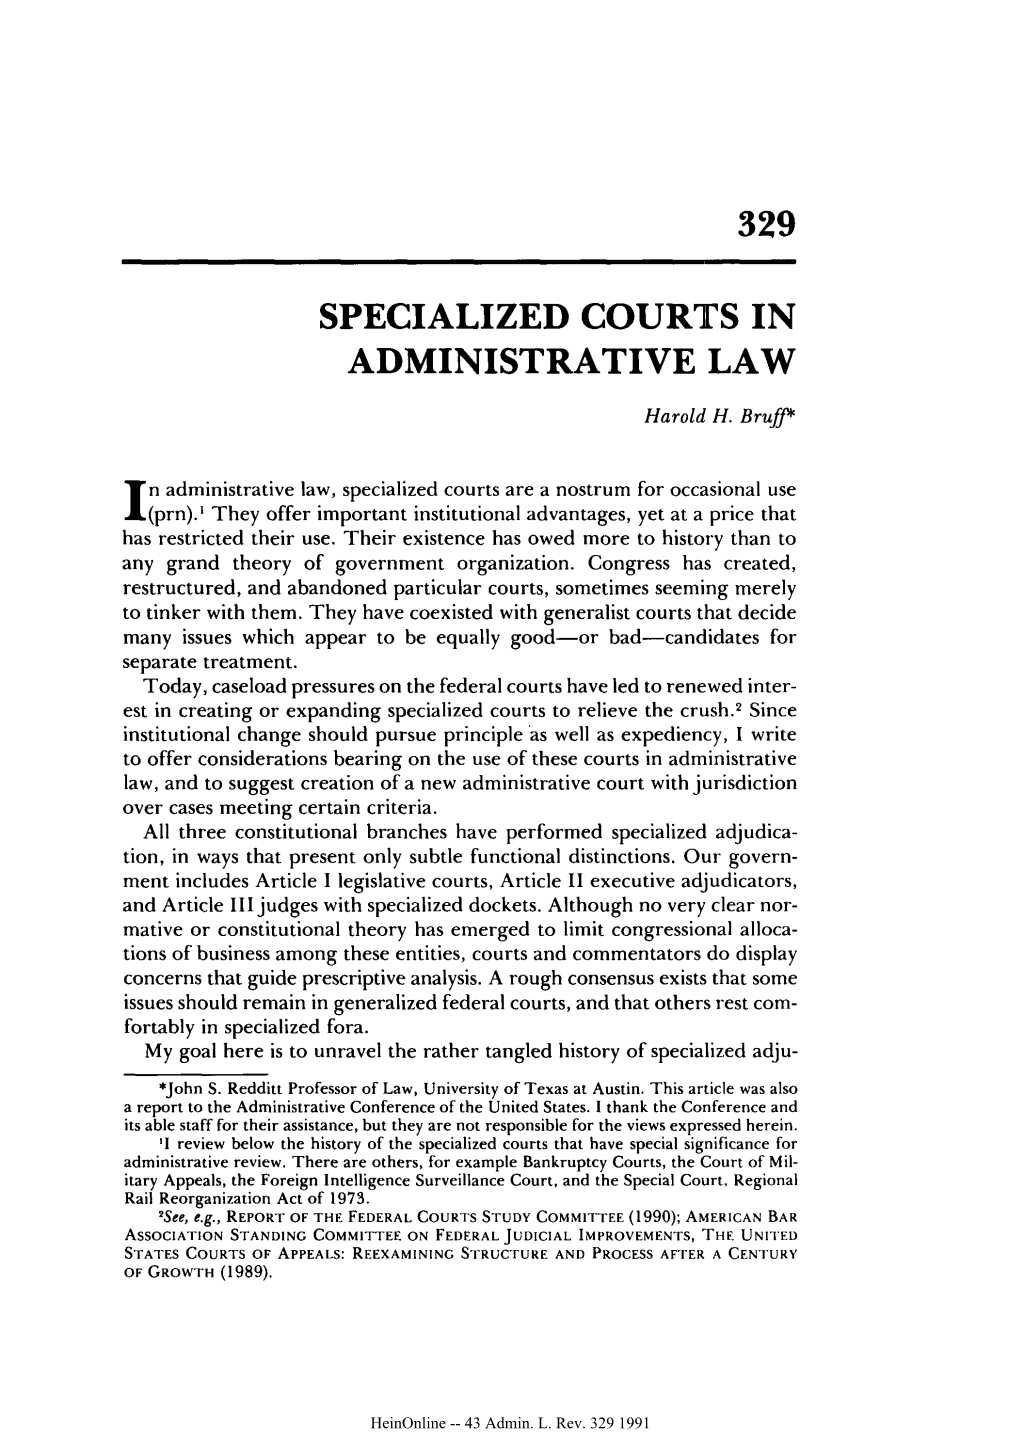 Specialized Courts in Administrative Law